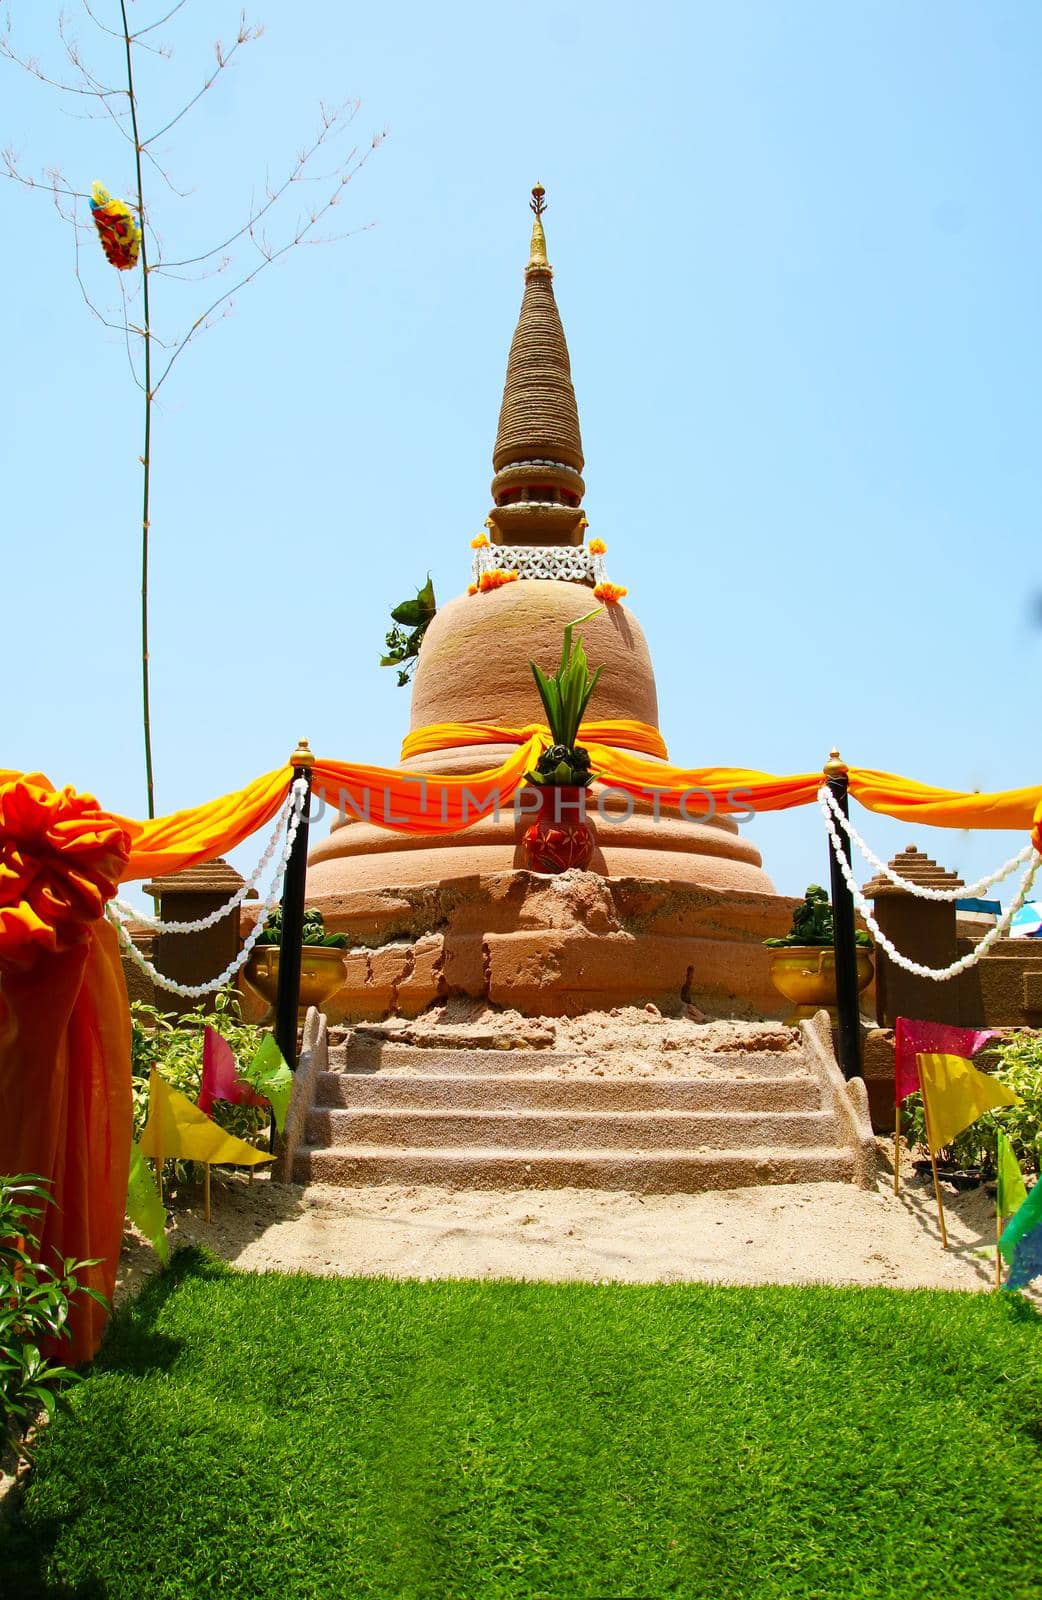 sand pagoda on green grass in Songkran festival represents In order to take the sand scraps attached to the feet from the temple to return the temple in the shape of a sand pagoda